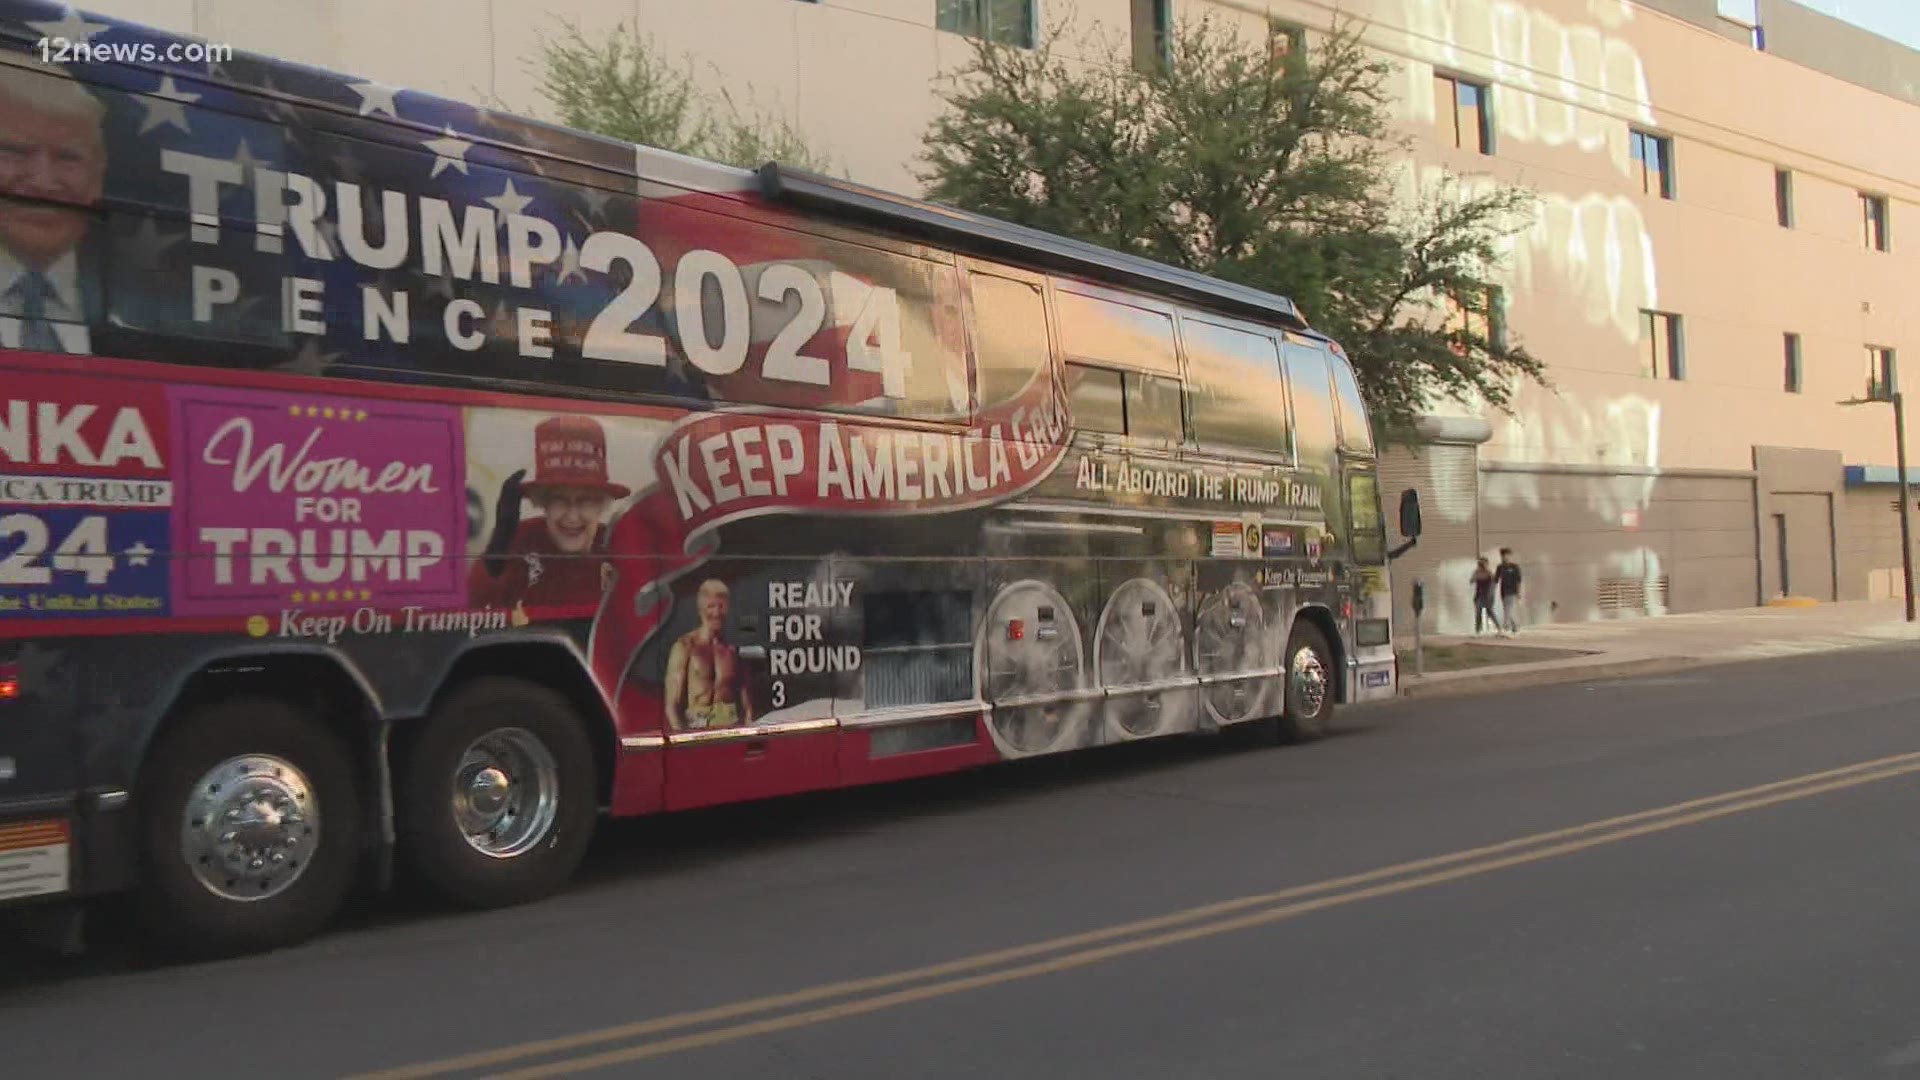 Trump bus gets new look in anticipation for 2024 | 12news.com